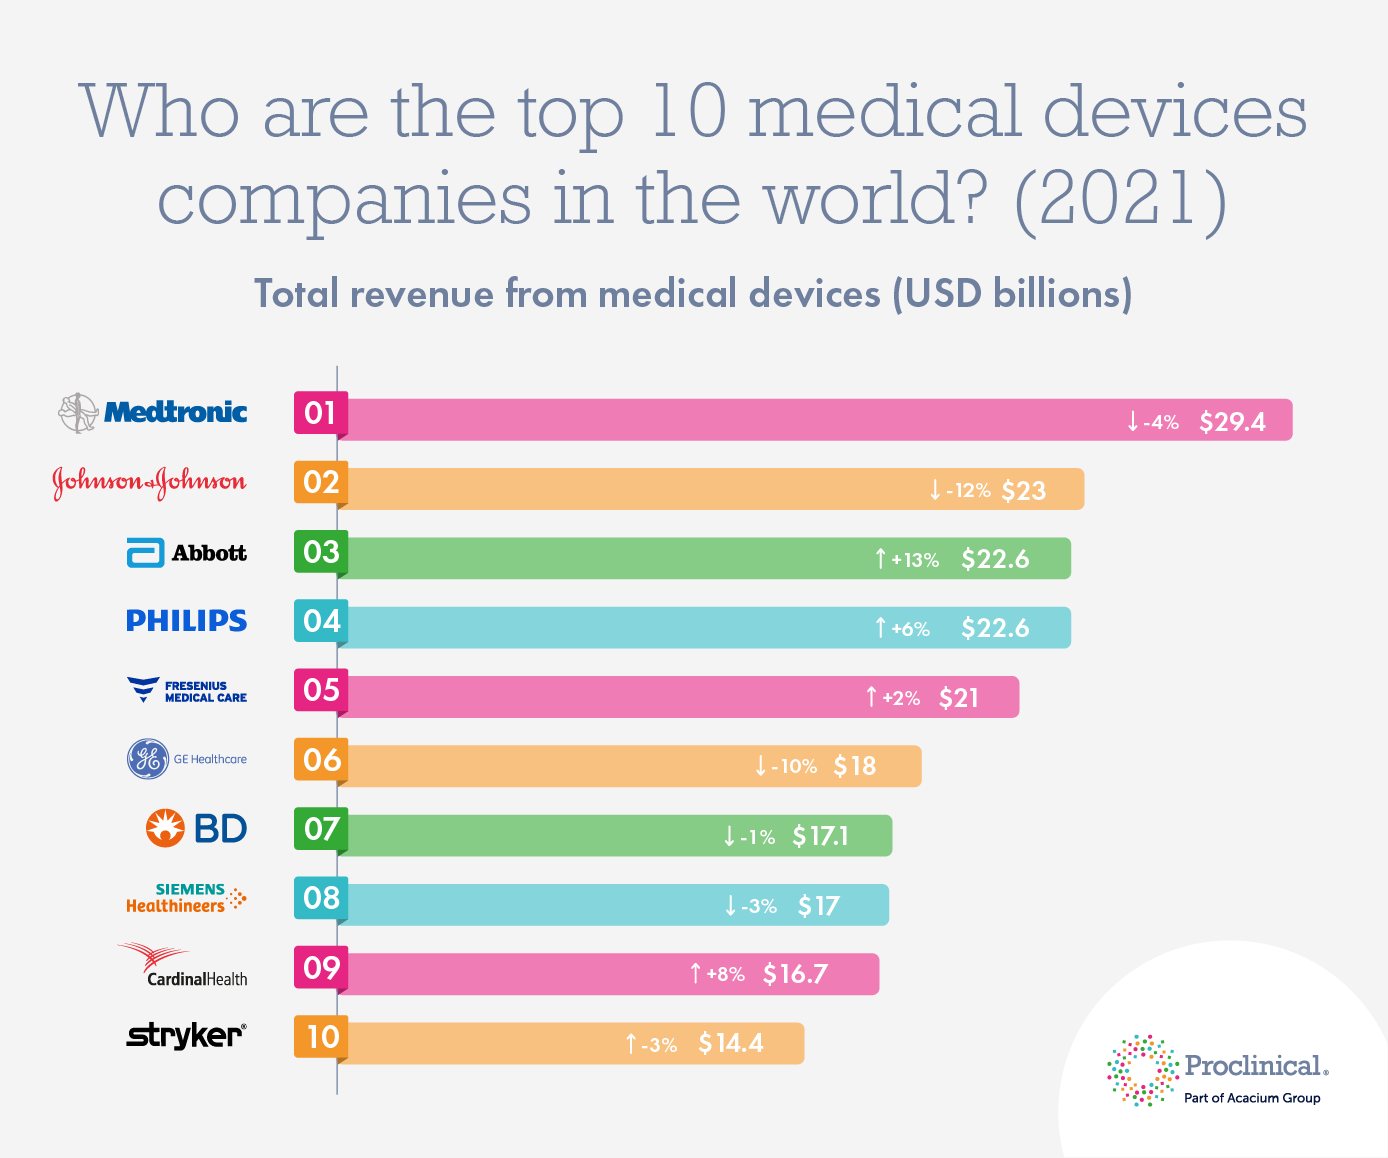 Who are the top 10 medical device companies in the world (2021